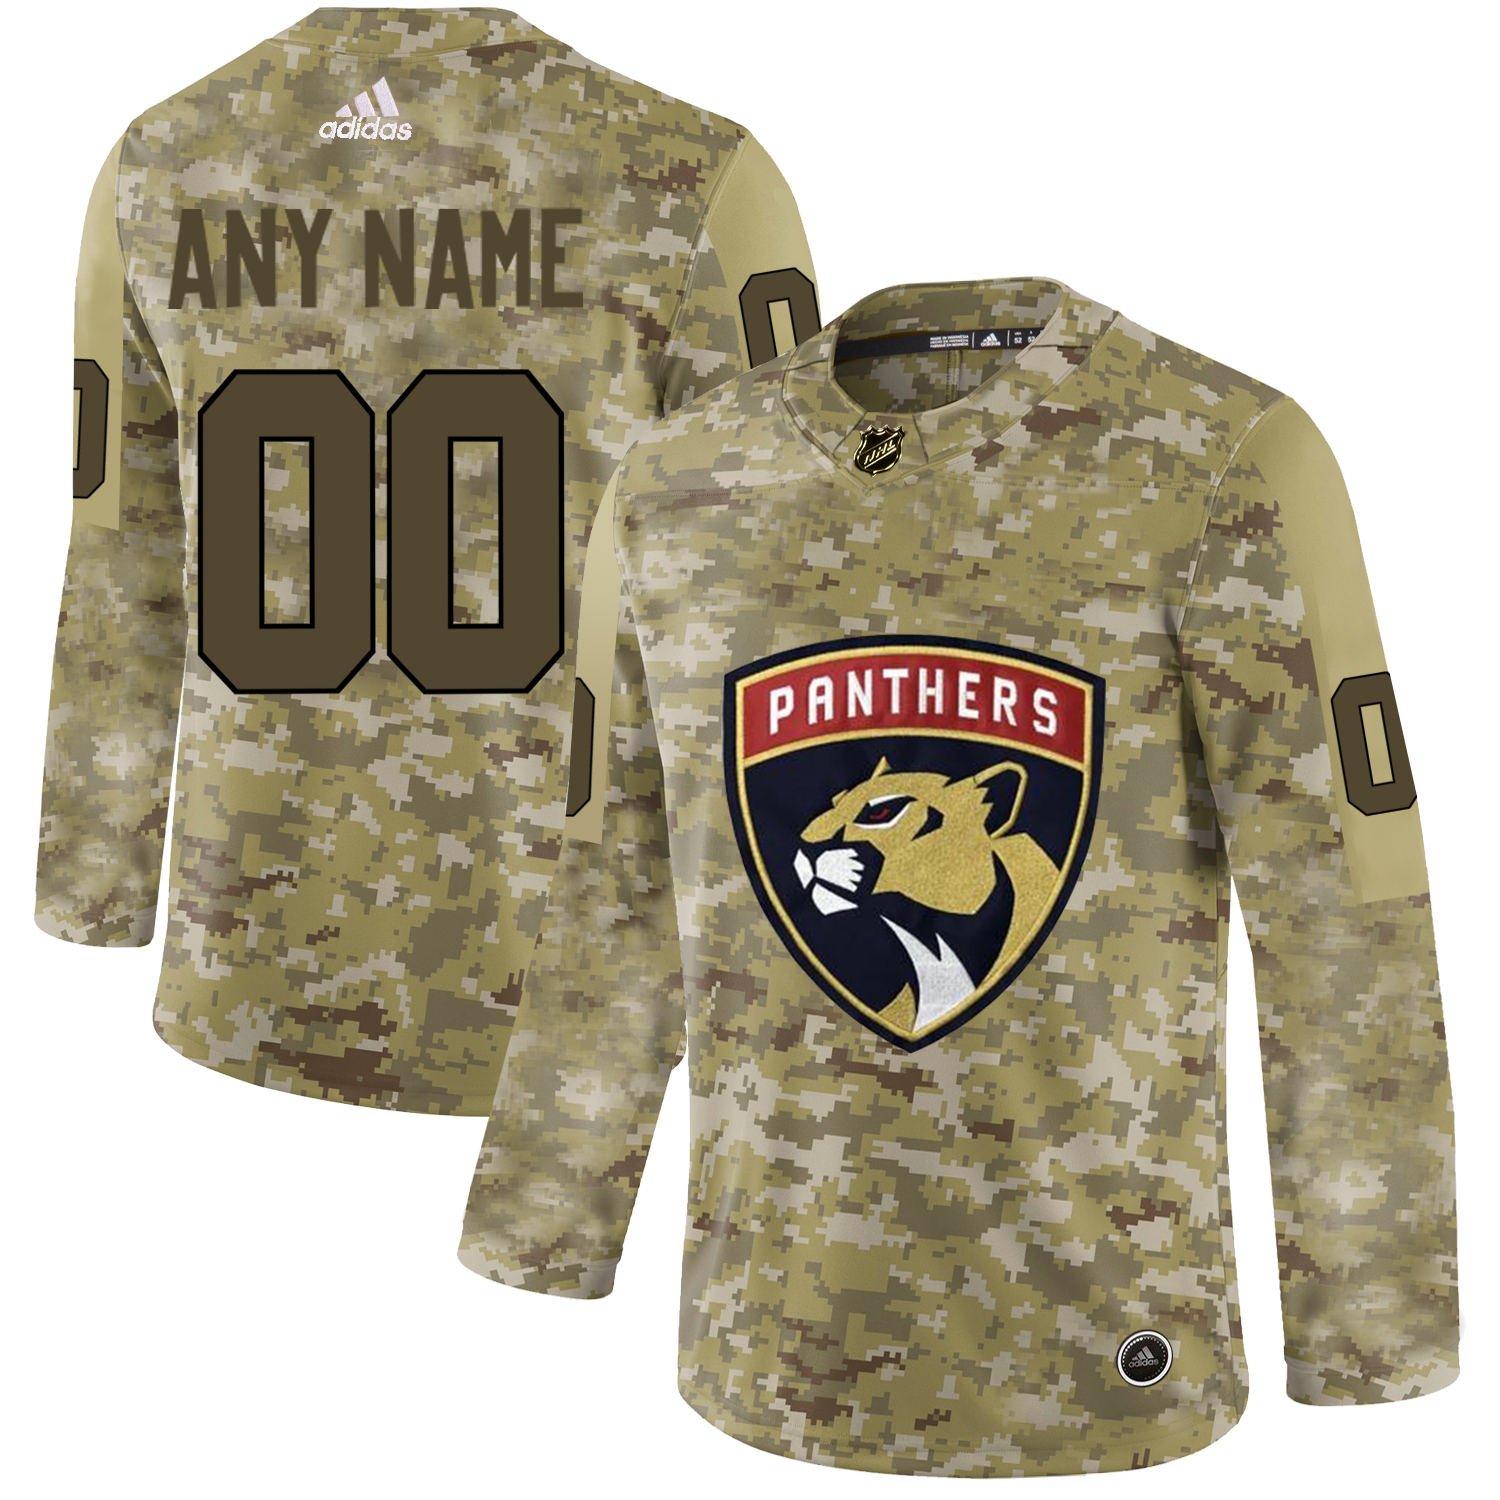 Men's Adidas Panthers Personalized Camo Authentic NHL Jersey